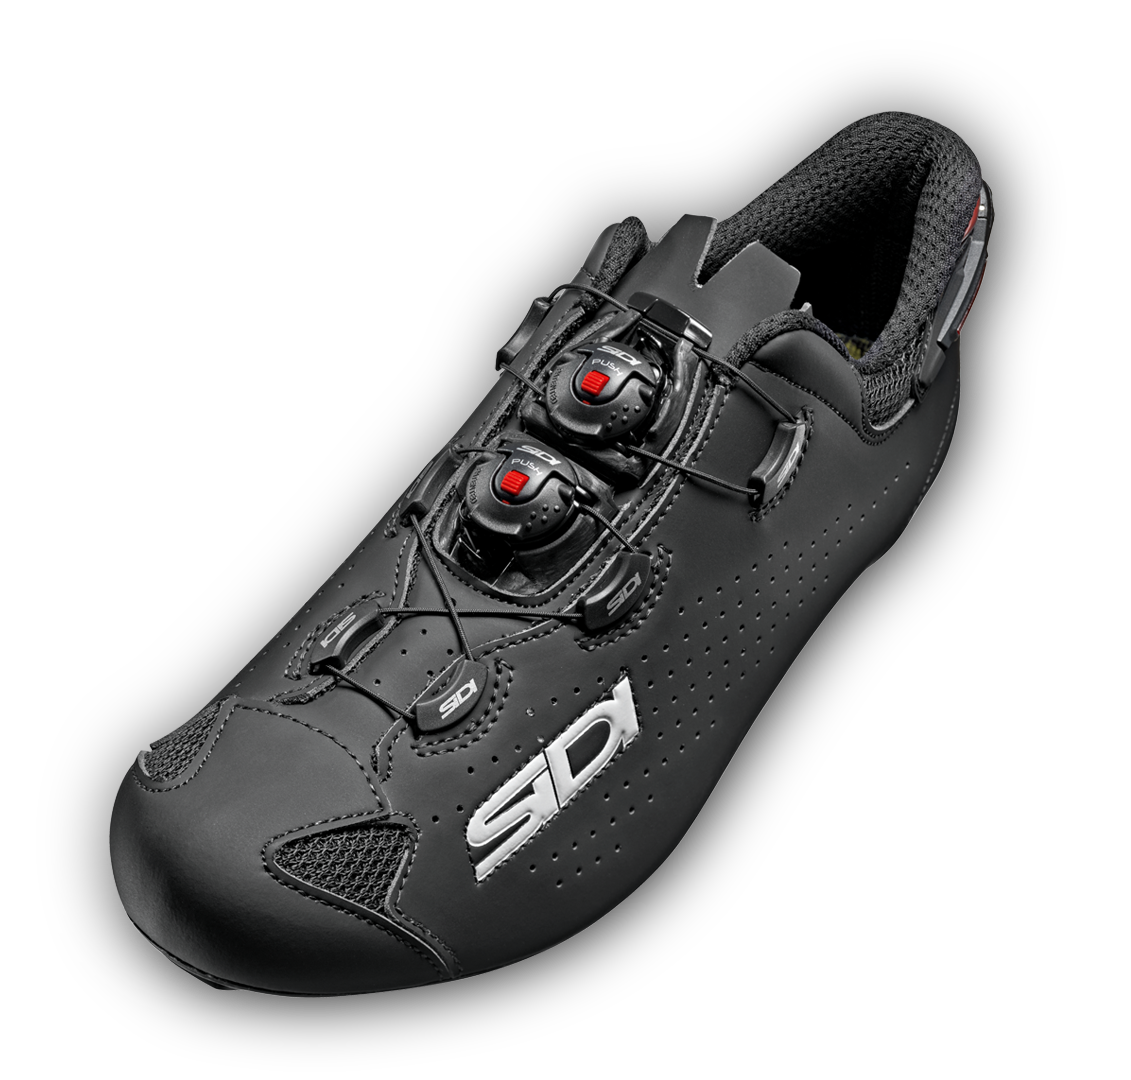 By law Bad luck Jew Cycling Shoes and Clothing - Sidi